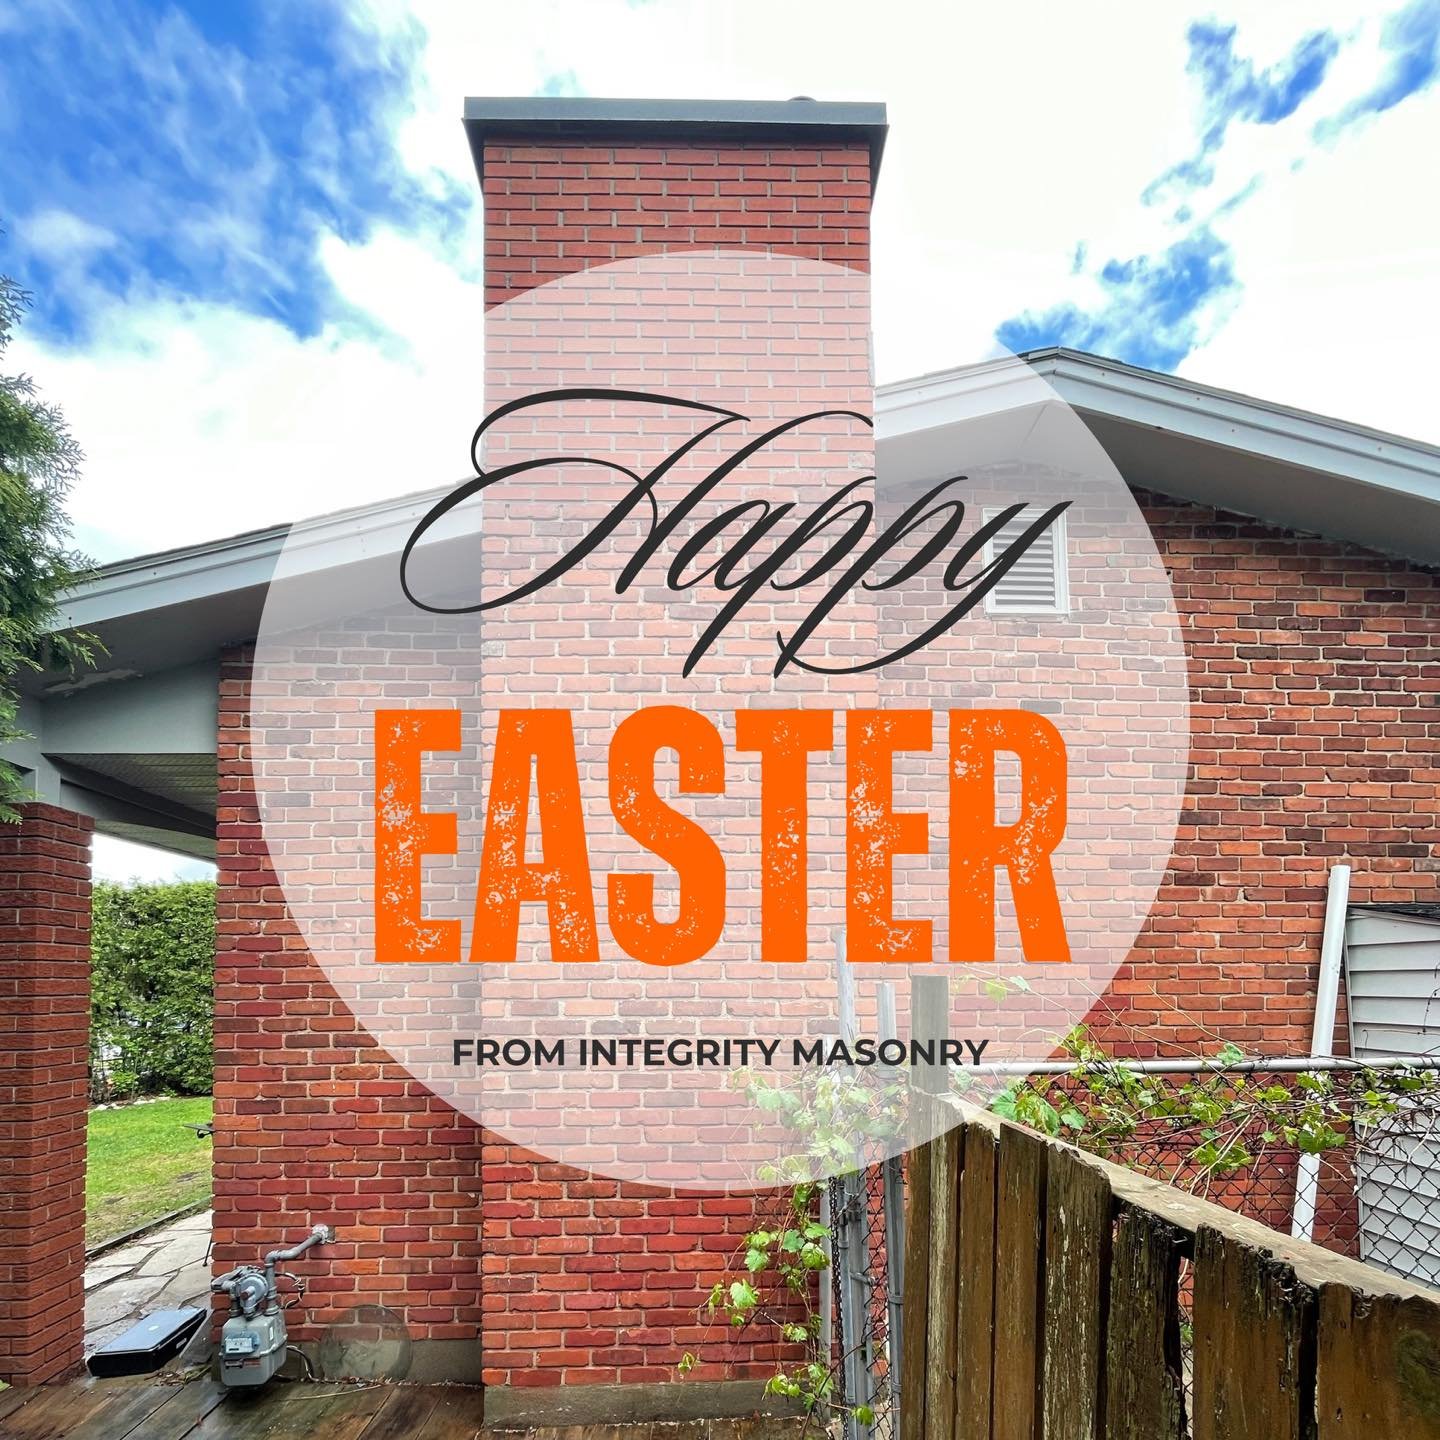 Hoppy Easter from Integrity Masonry 🐣💐🐰

May your Easter be as solid as our bricks and as smooth as our mortar. Don't worry, we promise not to leave any &quot;egg-stra&quot; surprises in your construction projects! 

Enjoy the day with your loved 